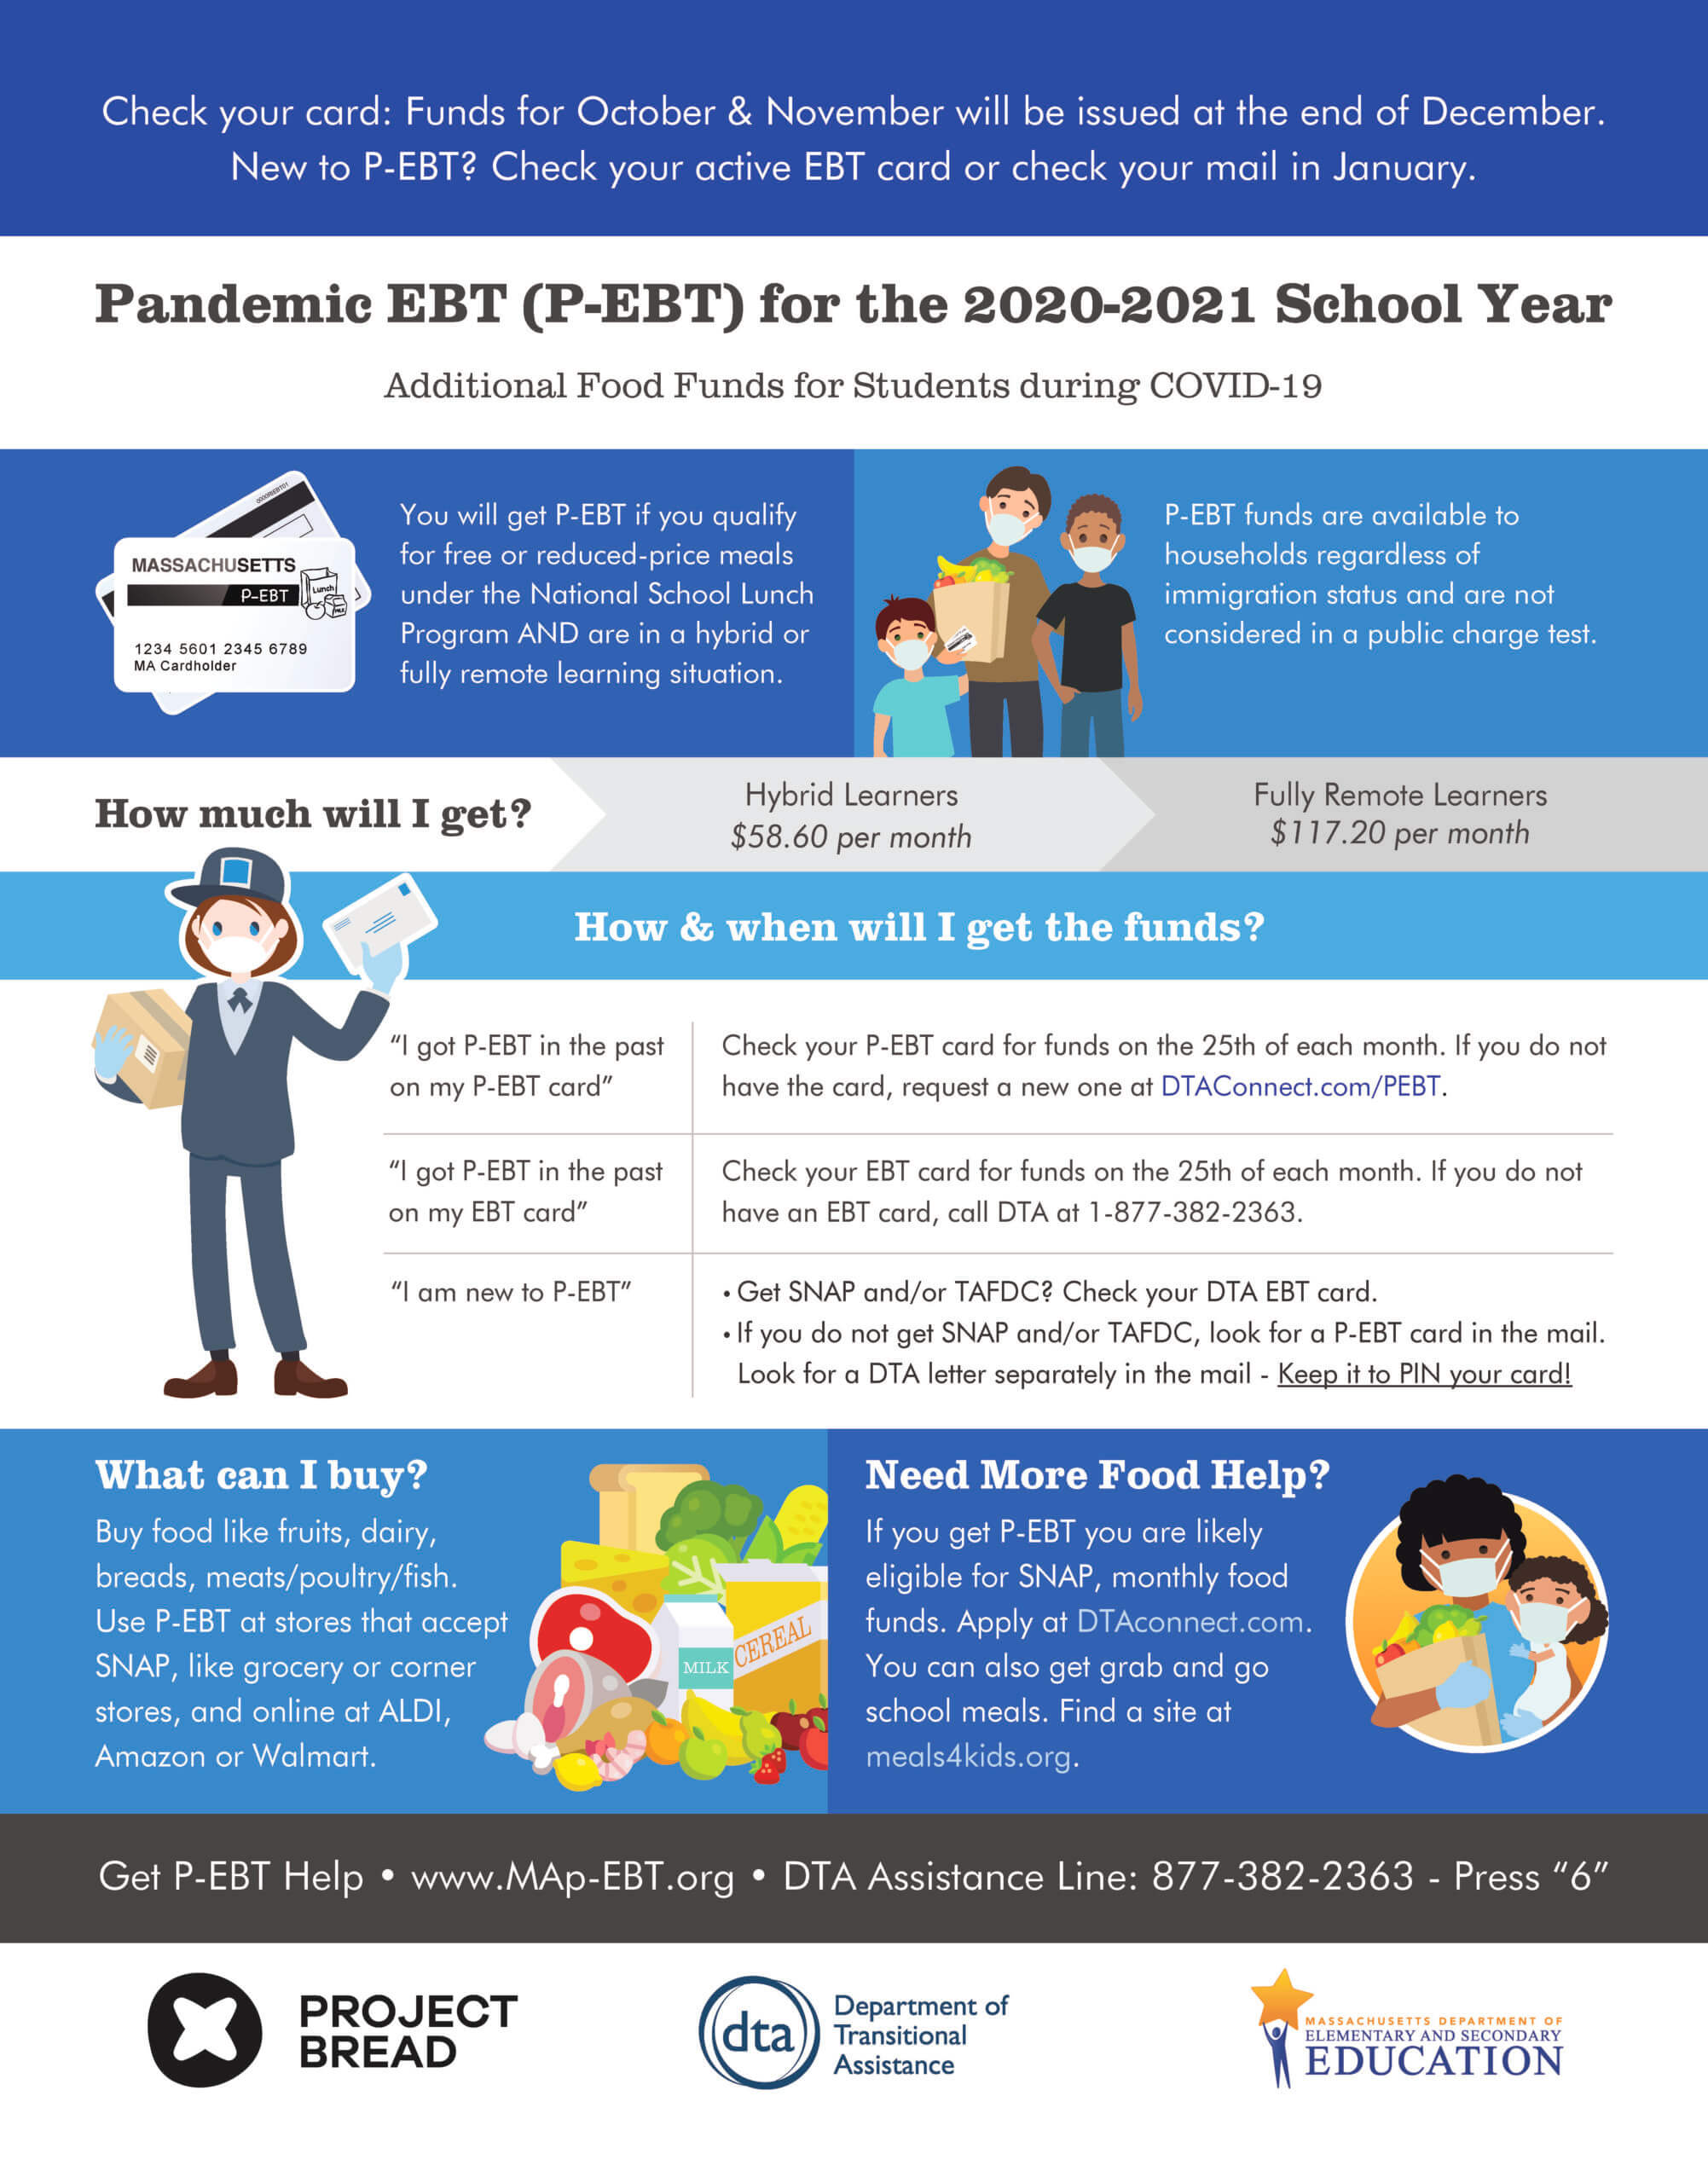 Pandemic EBT (P-EBT) for the 2020-2021 School Year